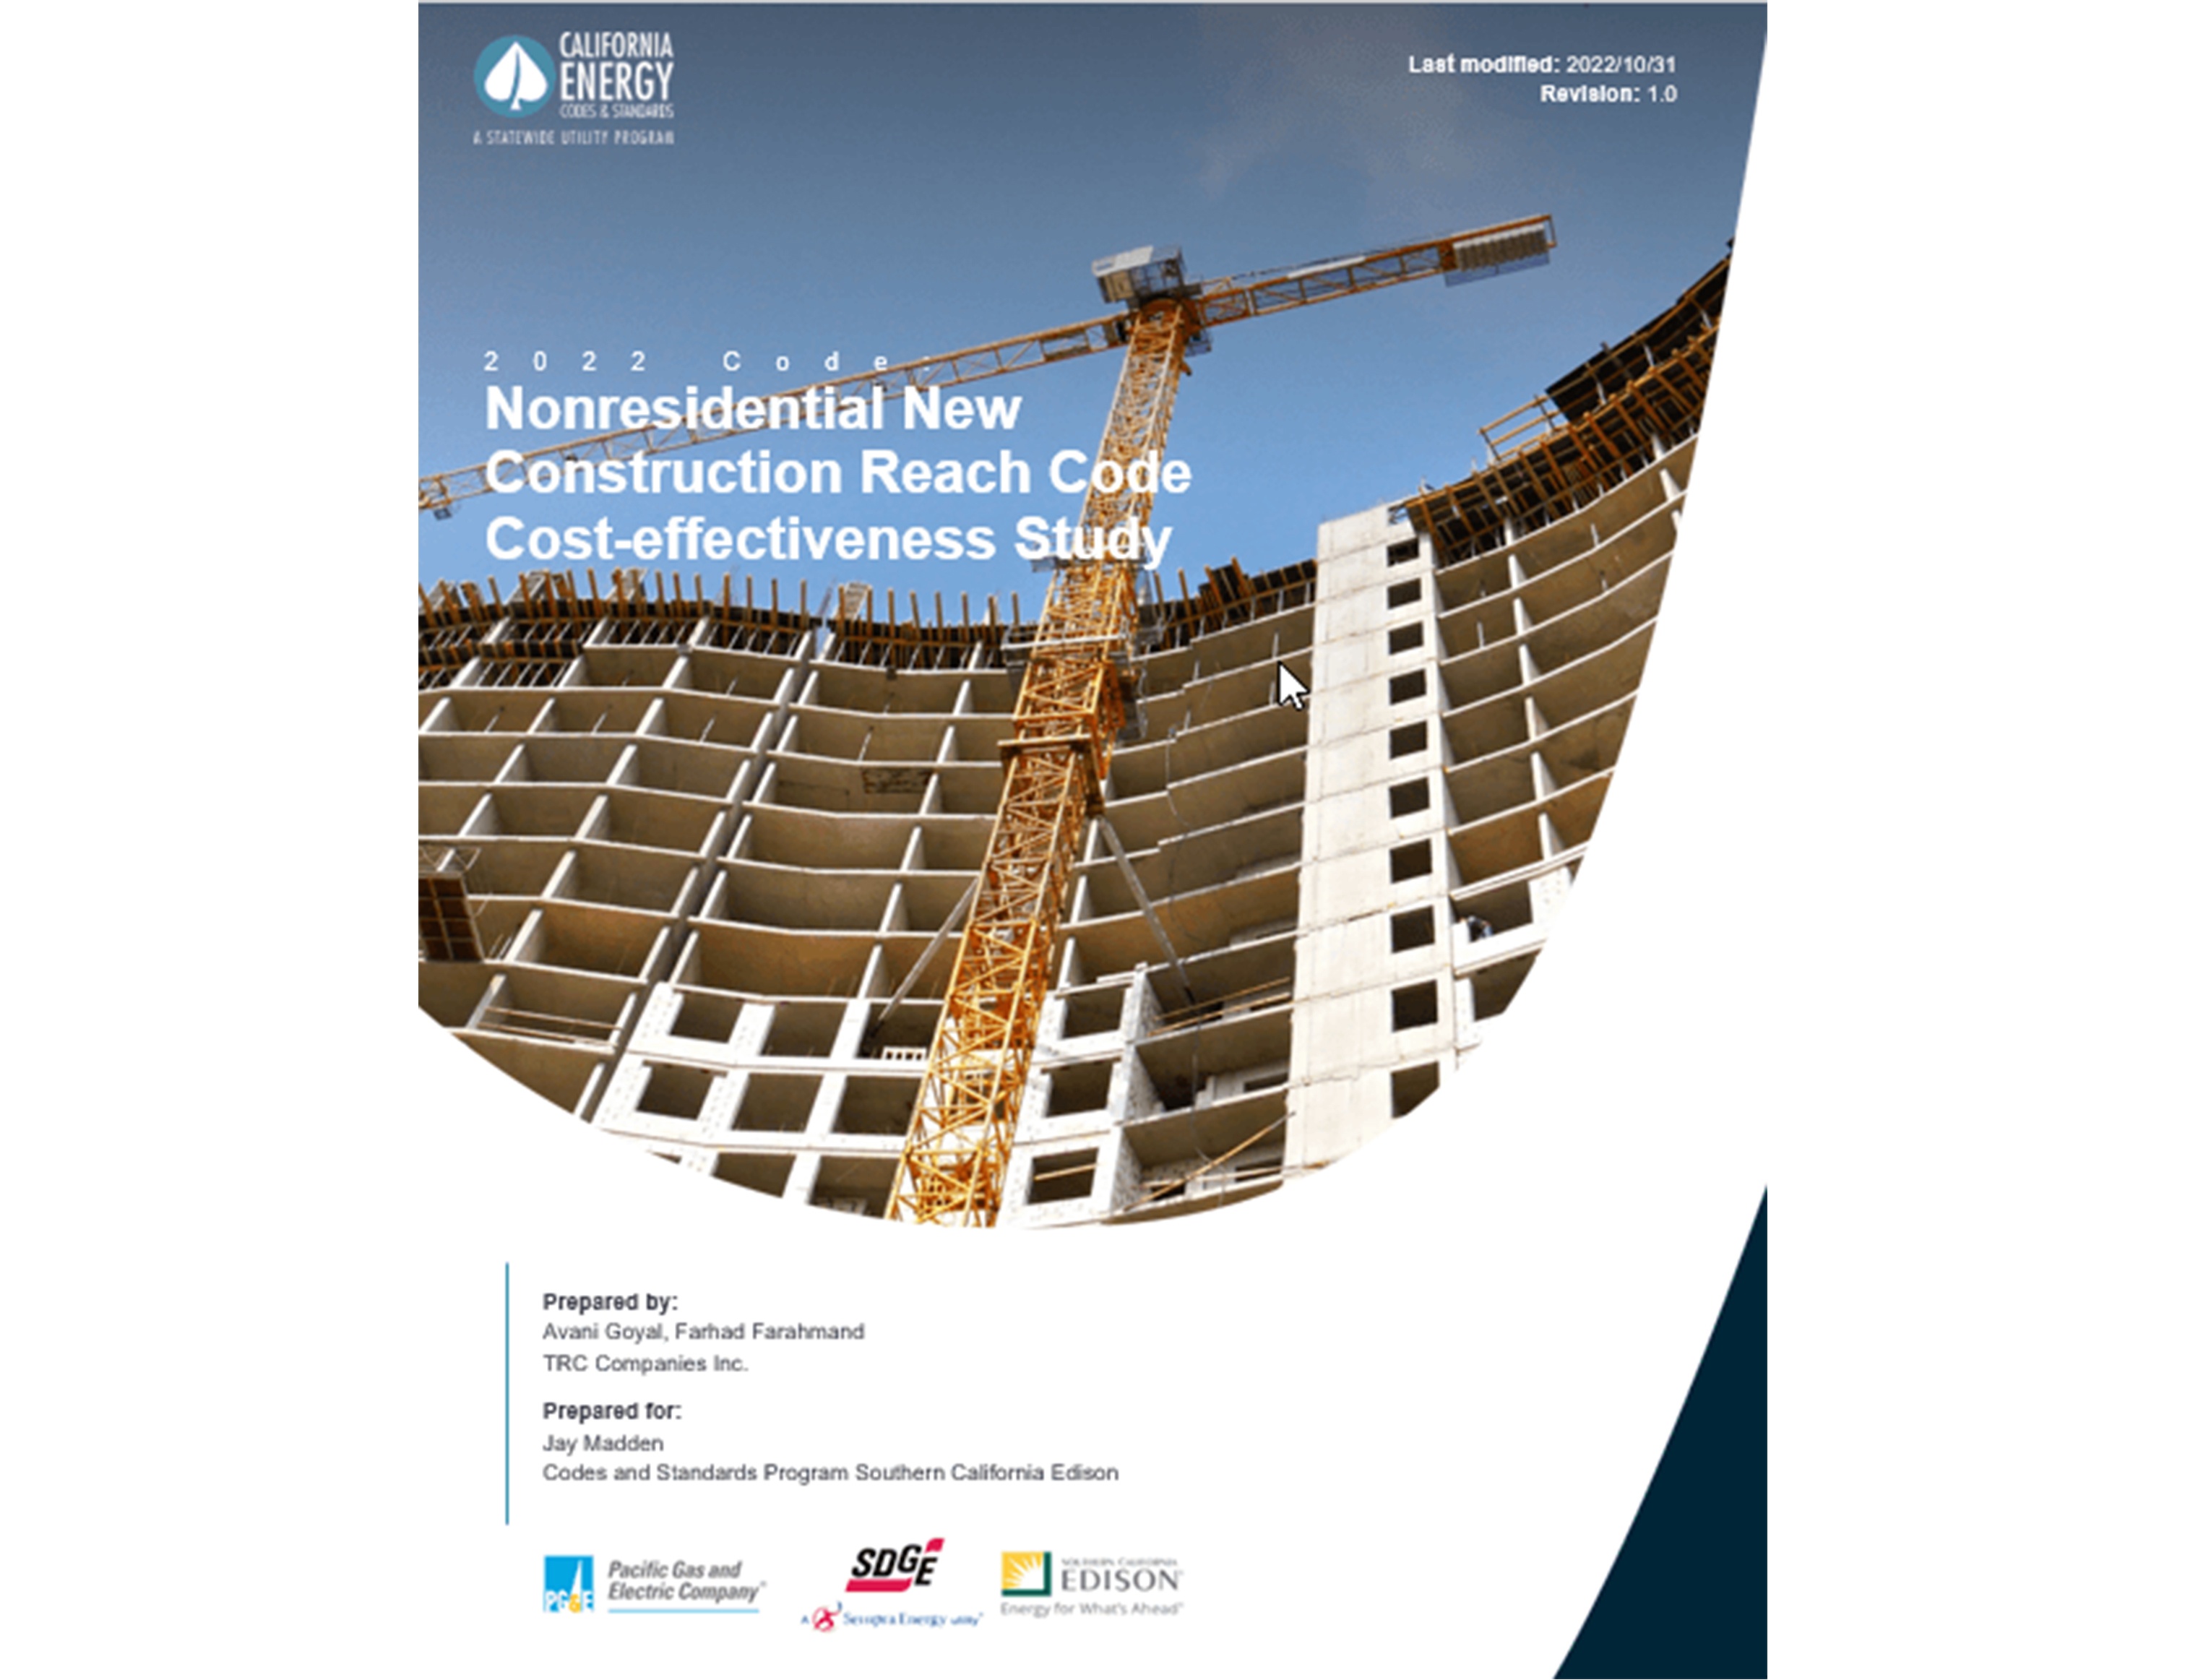 Cover of Nonresidential New Construction Cost-effectiveness Study